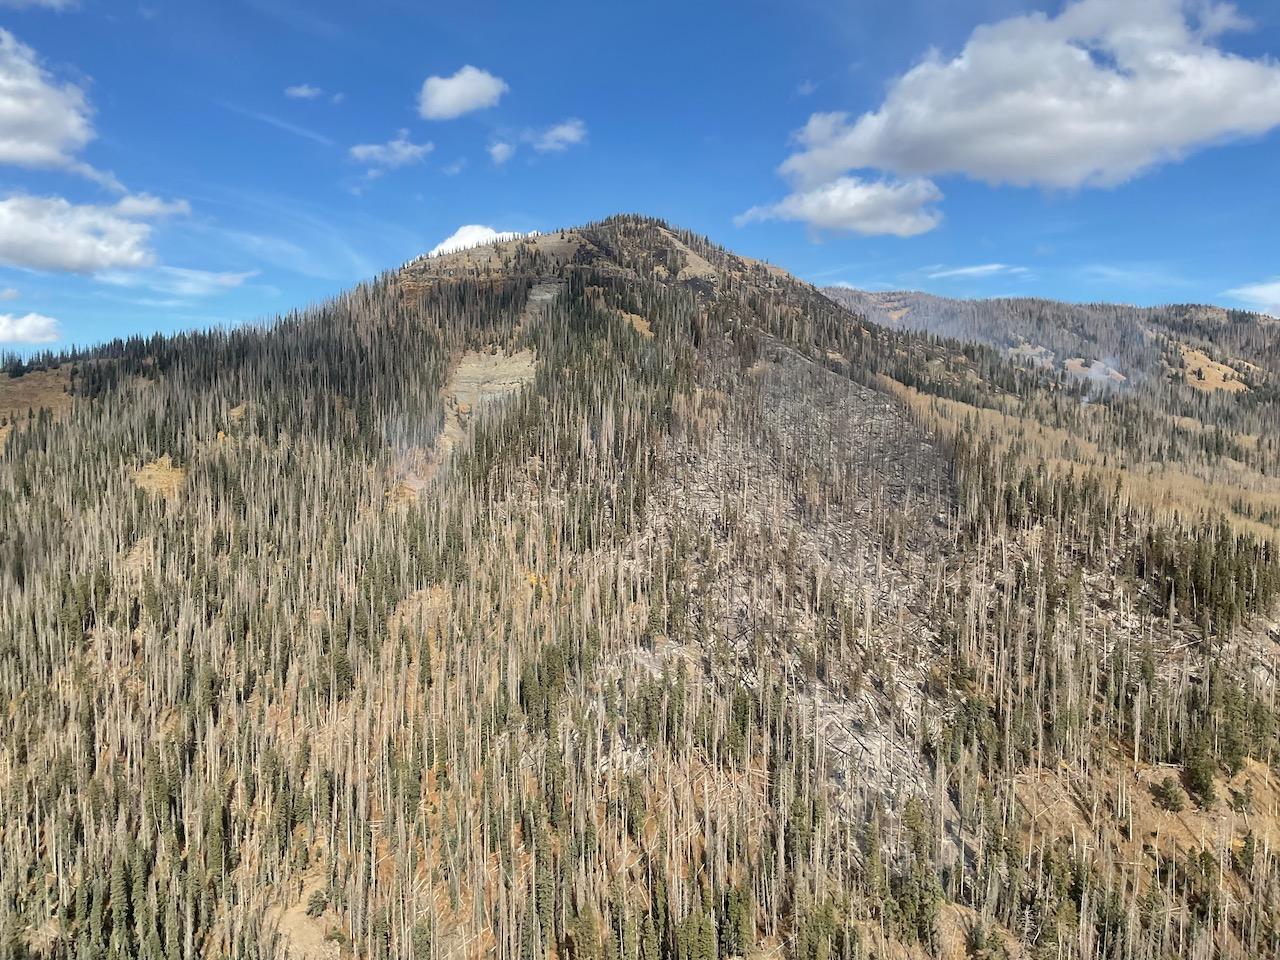 This is an aerial view showing several whisps of smoke rising from a rocky mountain peak, along with a blackened area that previously burned.